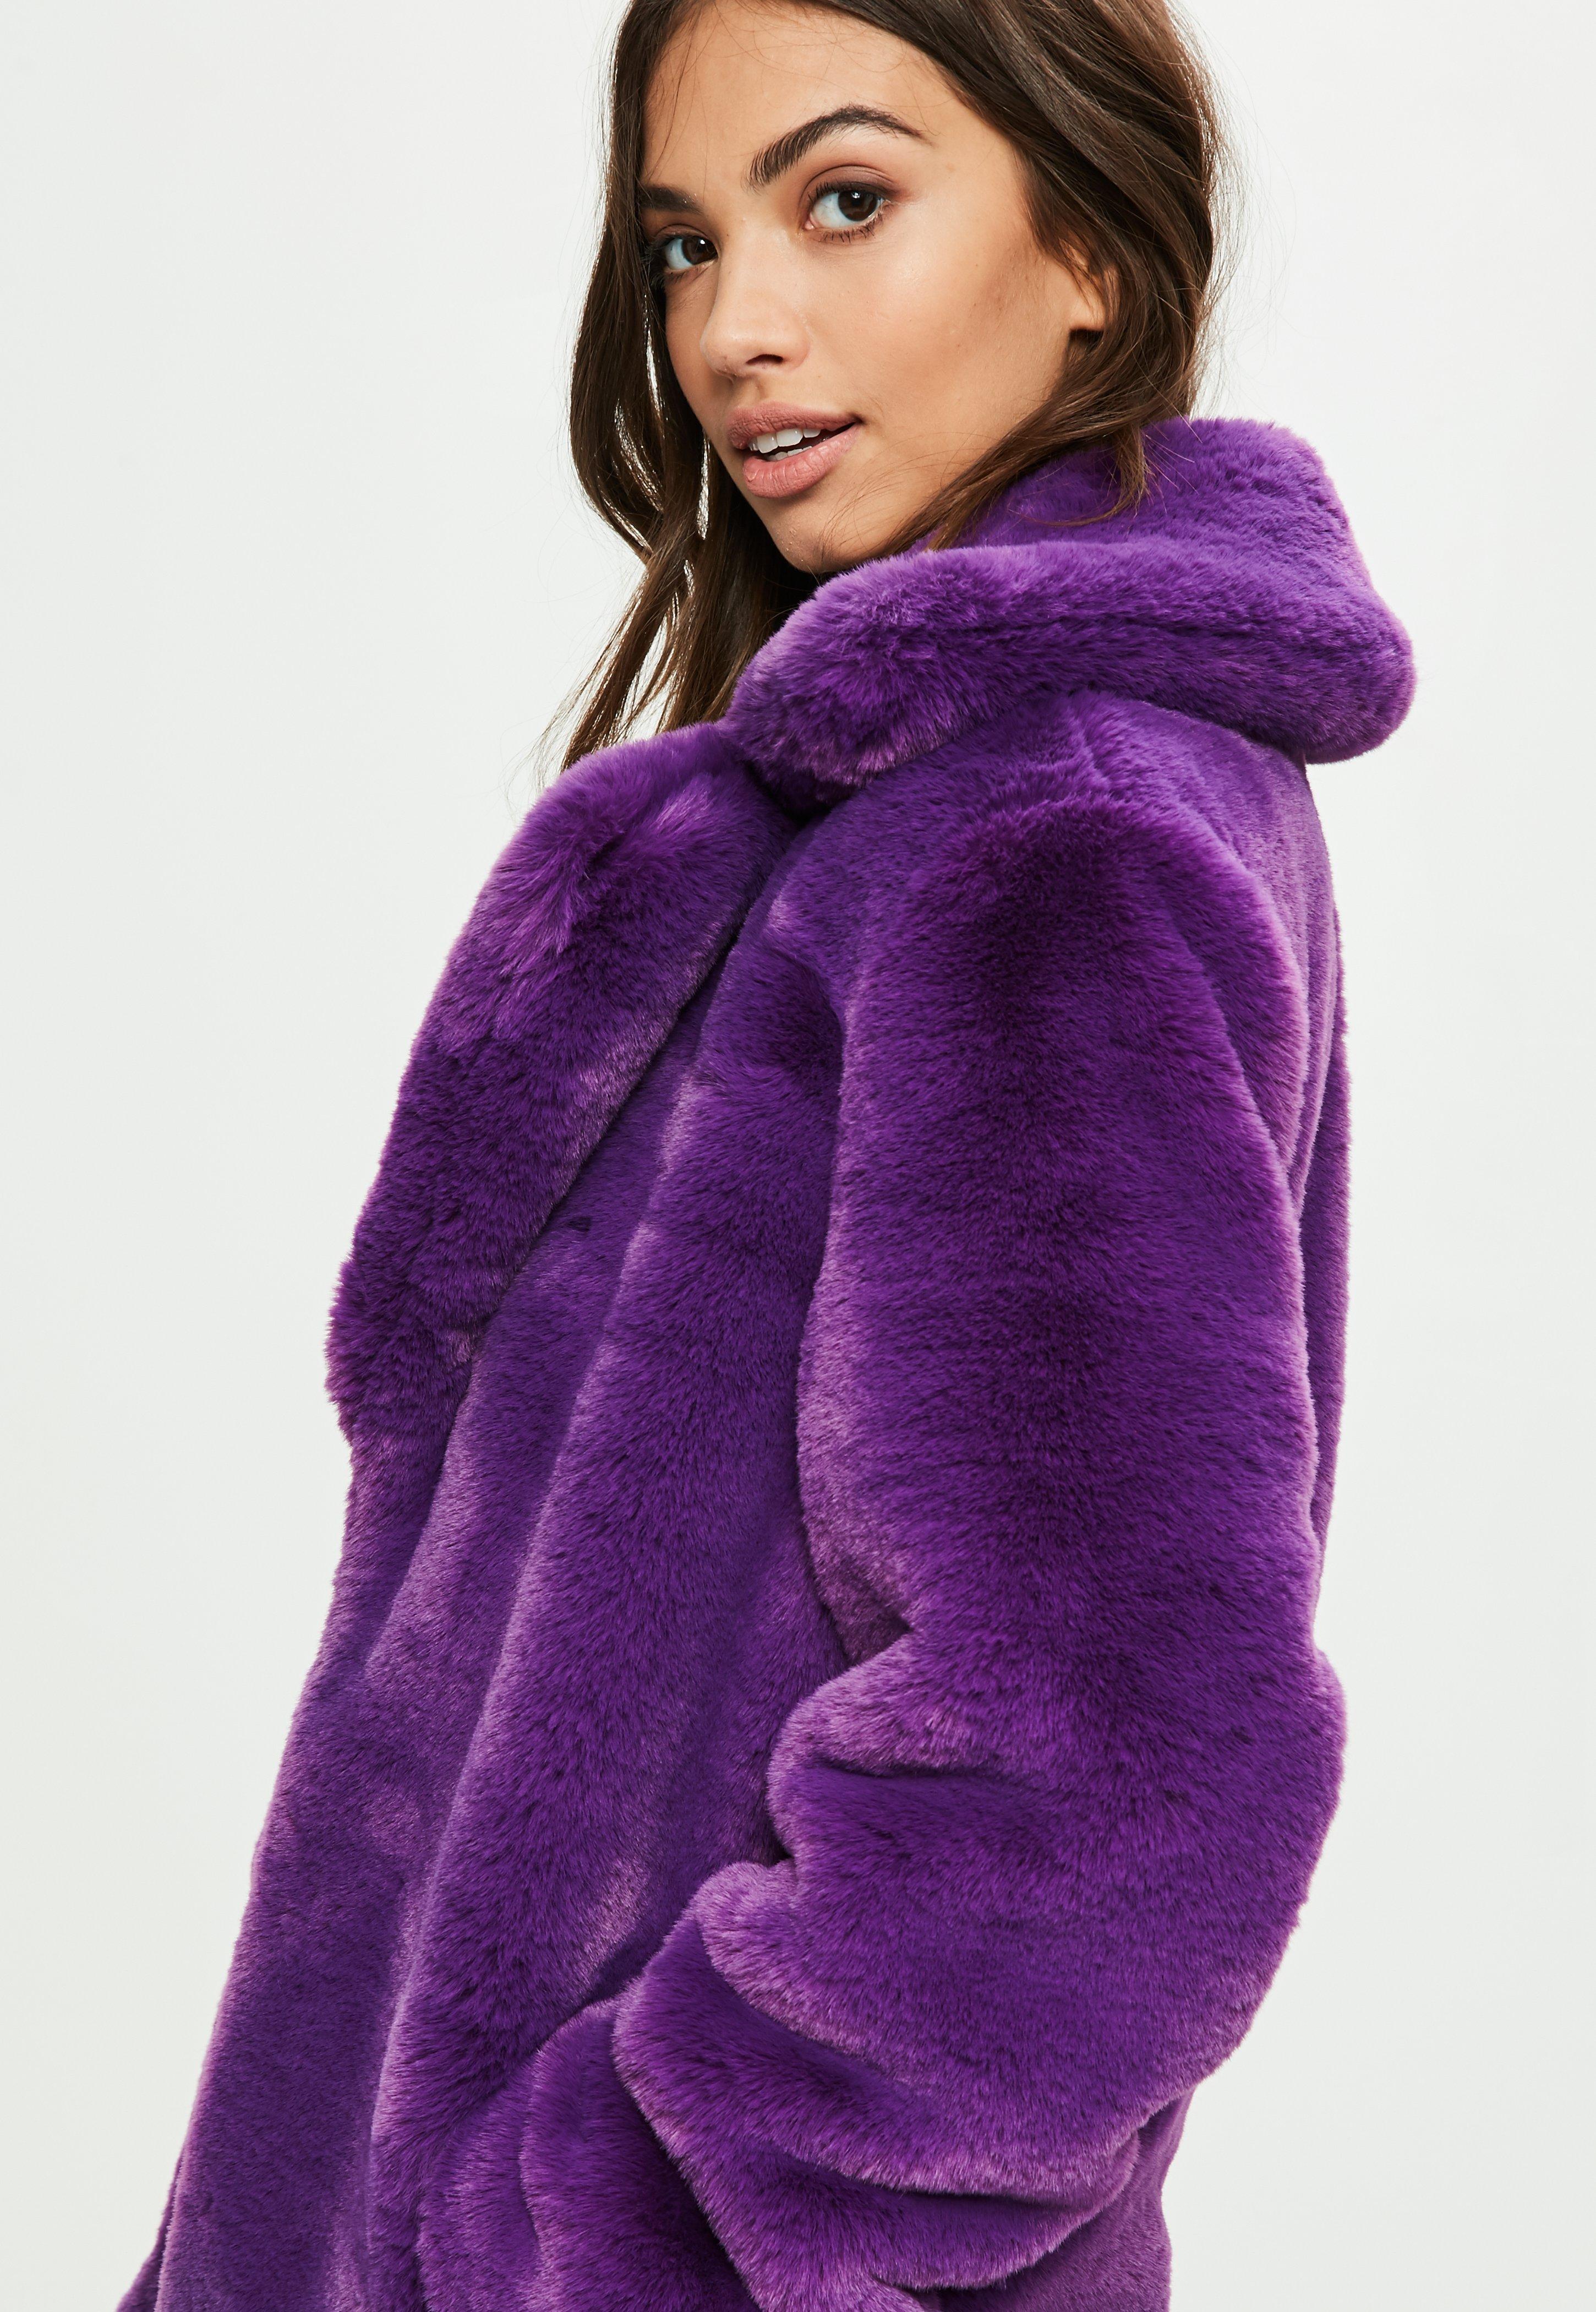 Lyst - Missguided Purple Faux Fur Coat With Collar in Purple